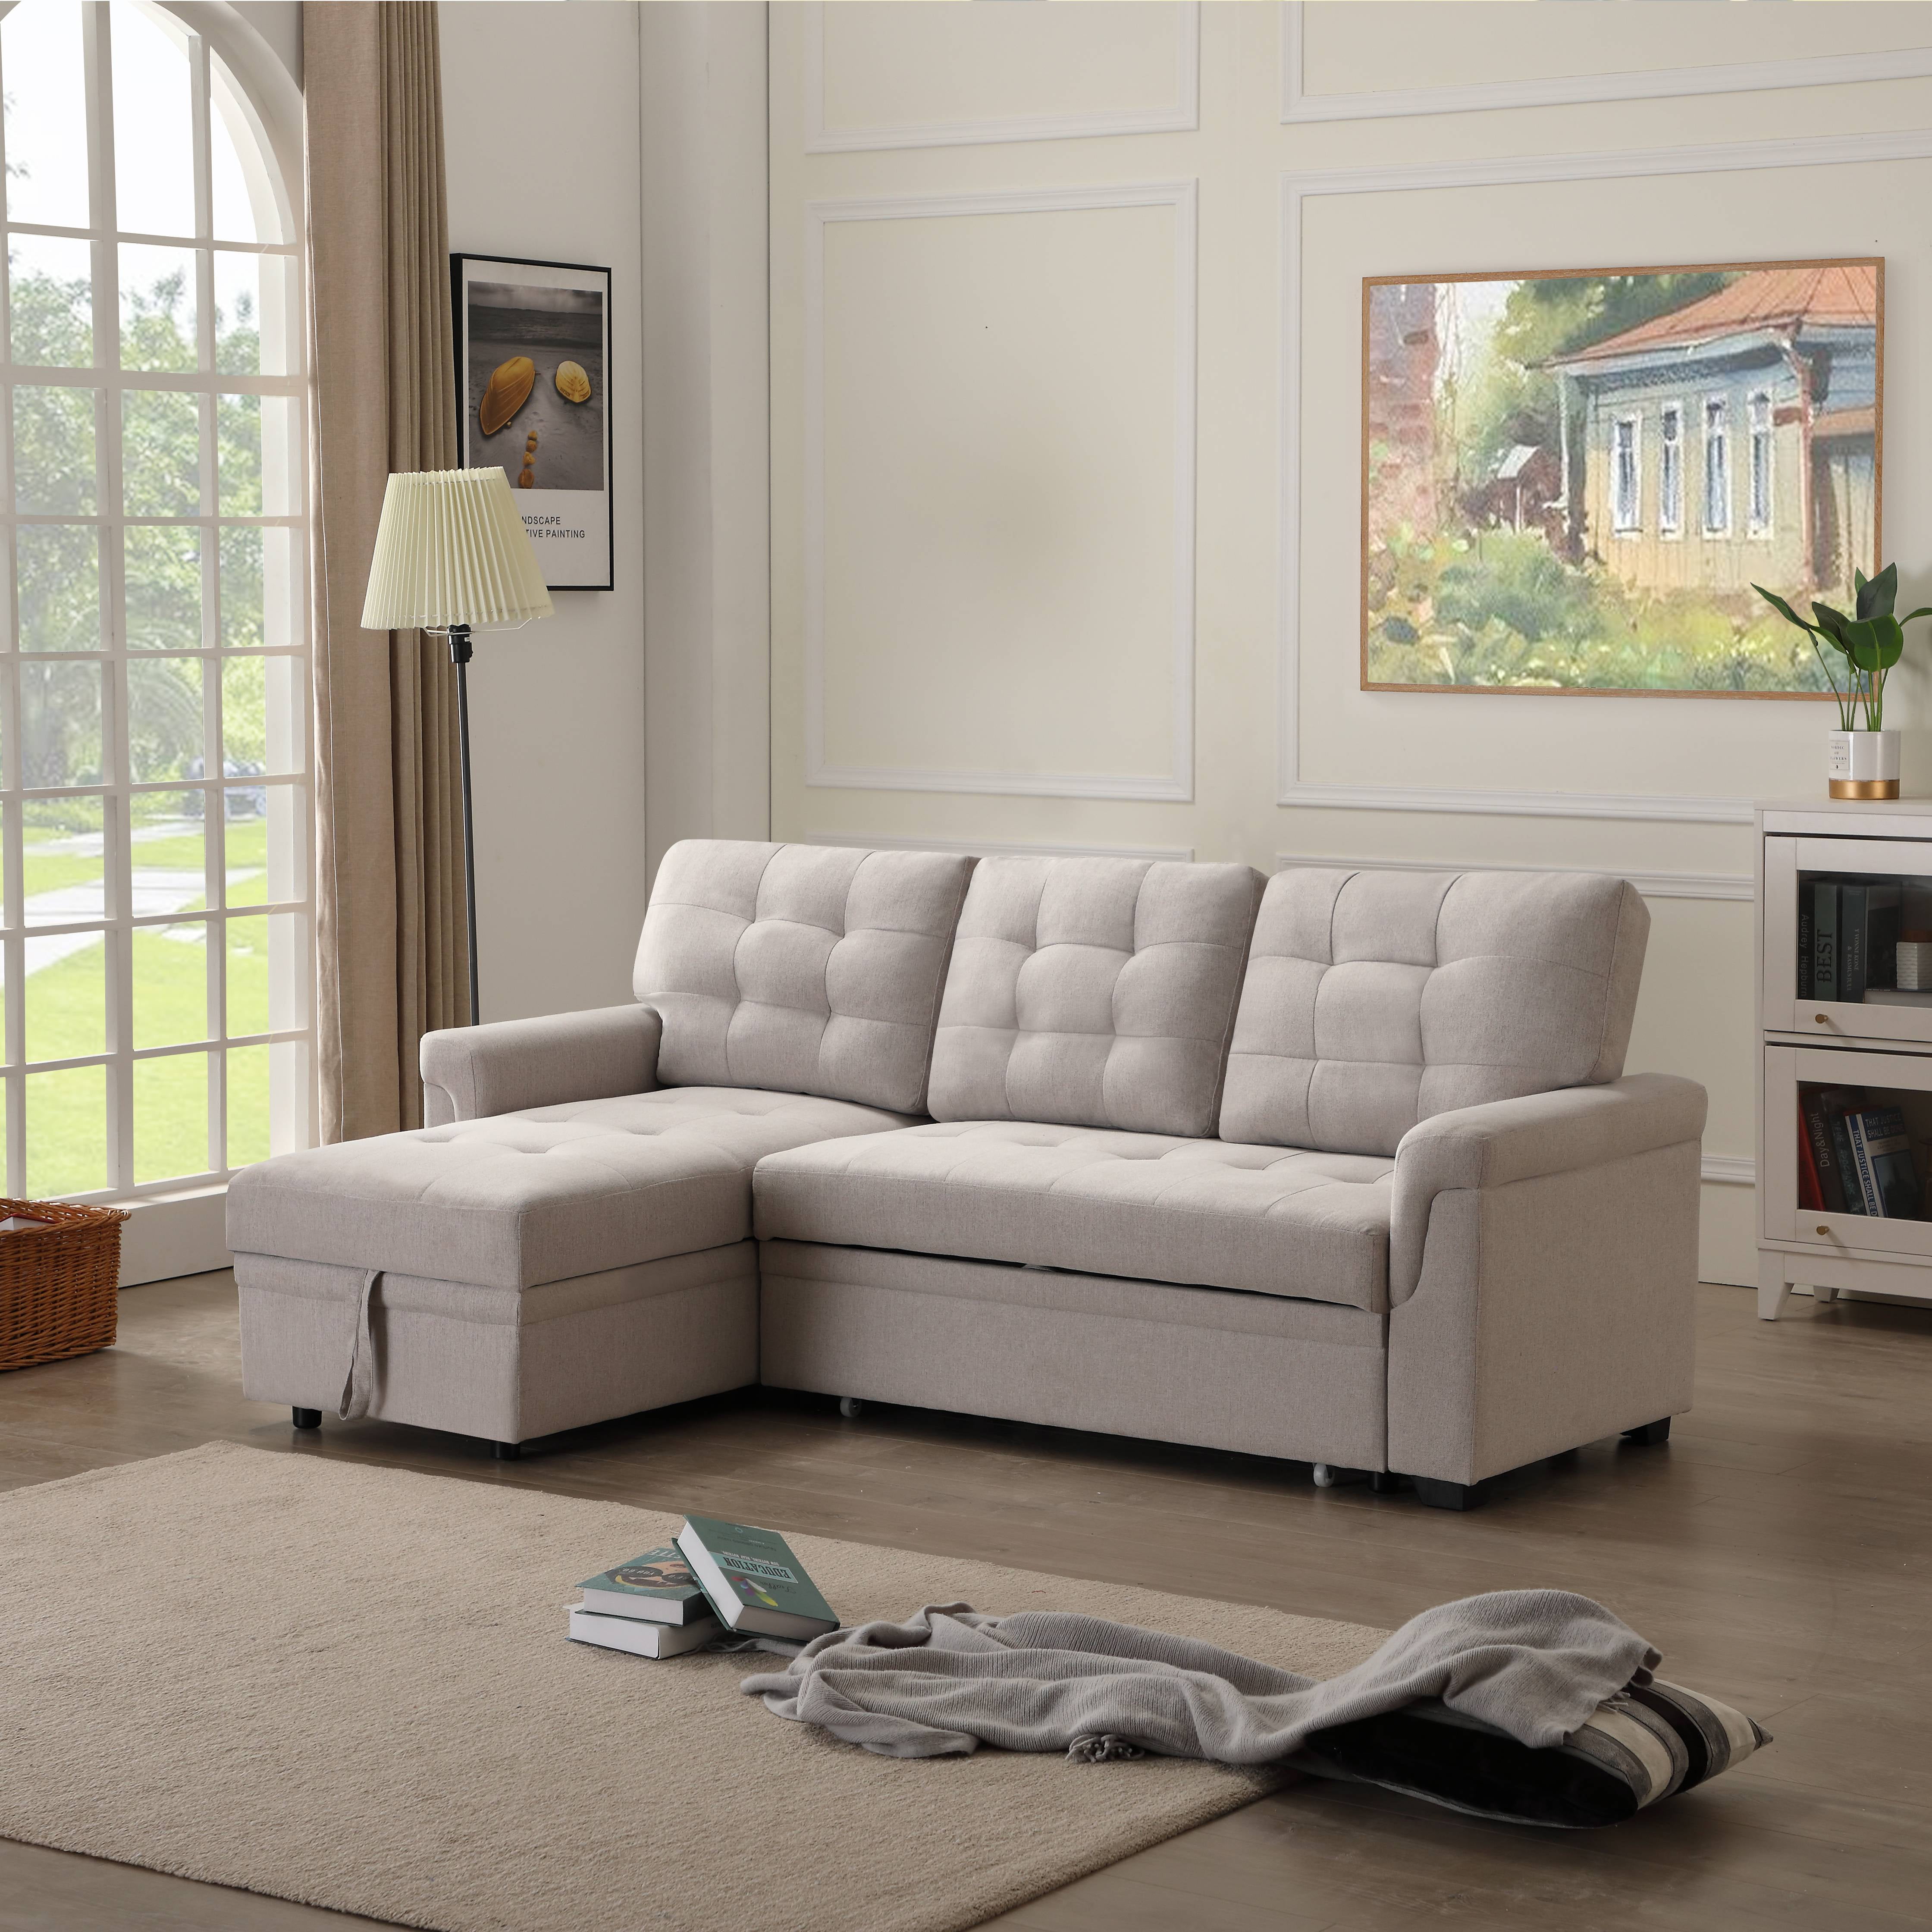 L Shaped Sectional Sofa Bed With, Sectional Sofa With Chaise Storage